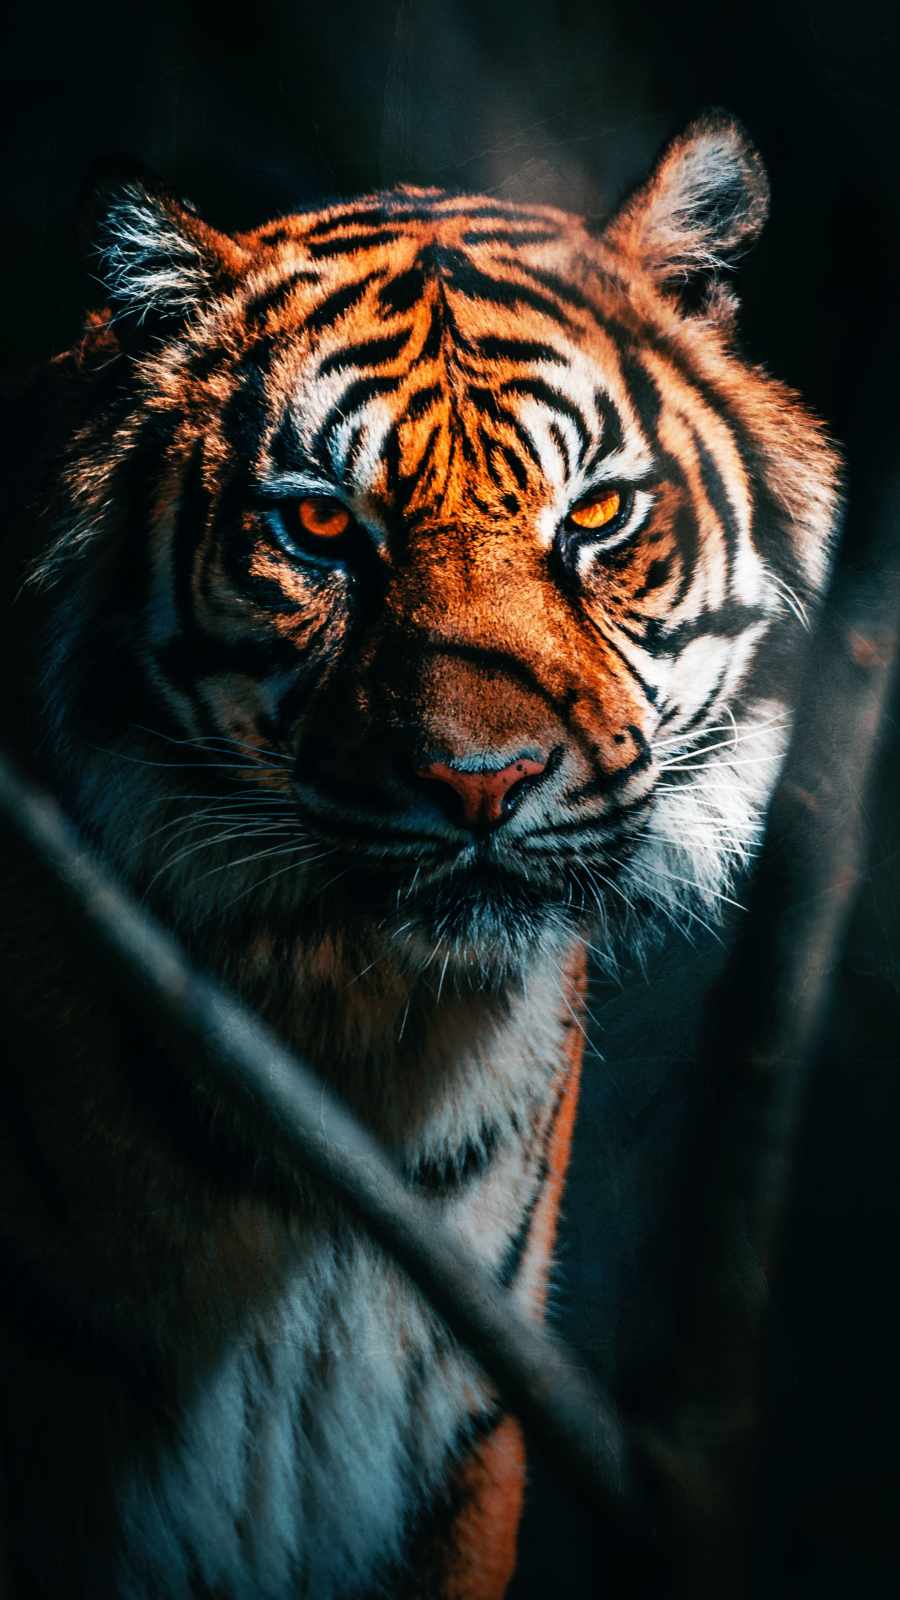 The Predator Tiger - IPhone Wallpapers : iPhone Wallpapers